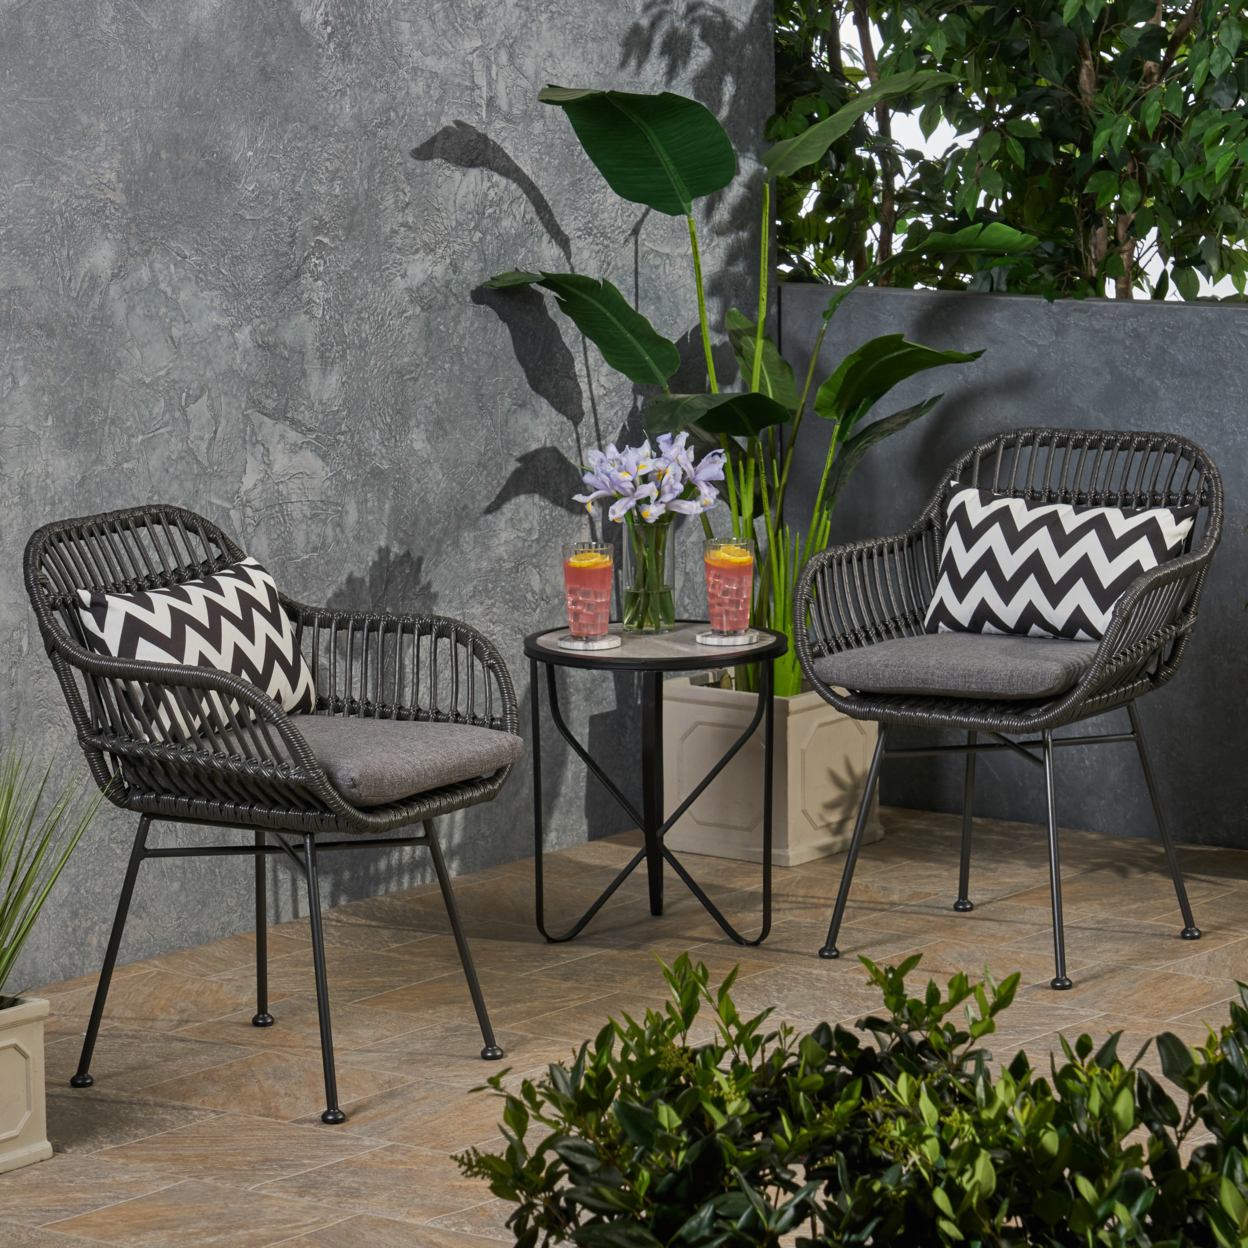 Rodney Outdoor Woven Faux Rattan Chairs With Cushions (Set Of 2) - Gray + Dark Gray + Black Finish